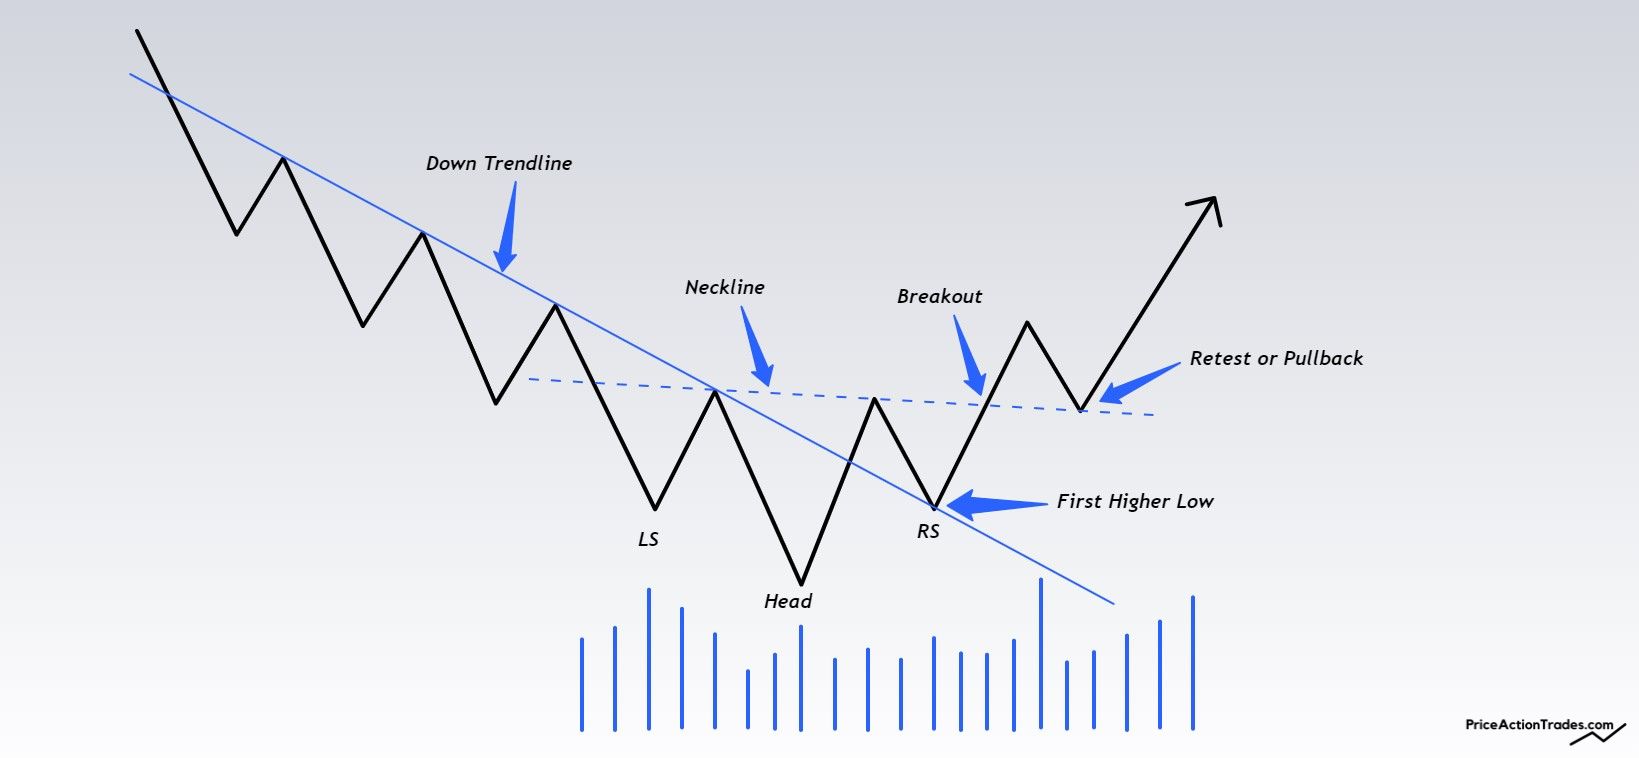 An illustration of how an inverse head-and-shoulders pattern forms following a long term downtrend.